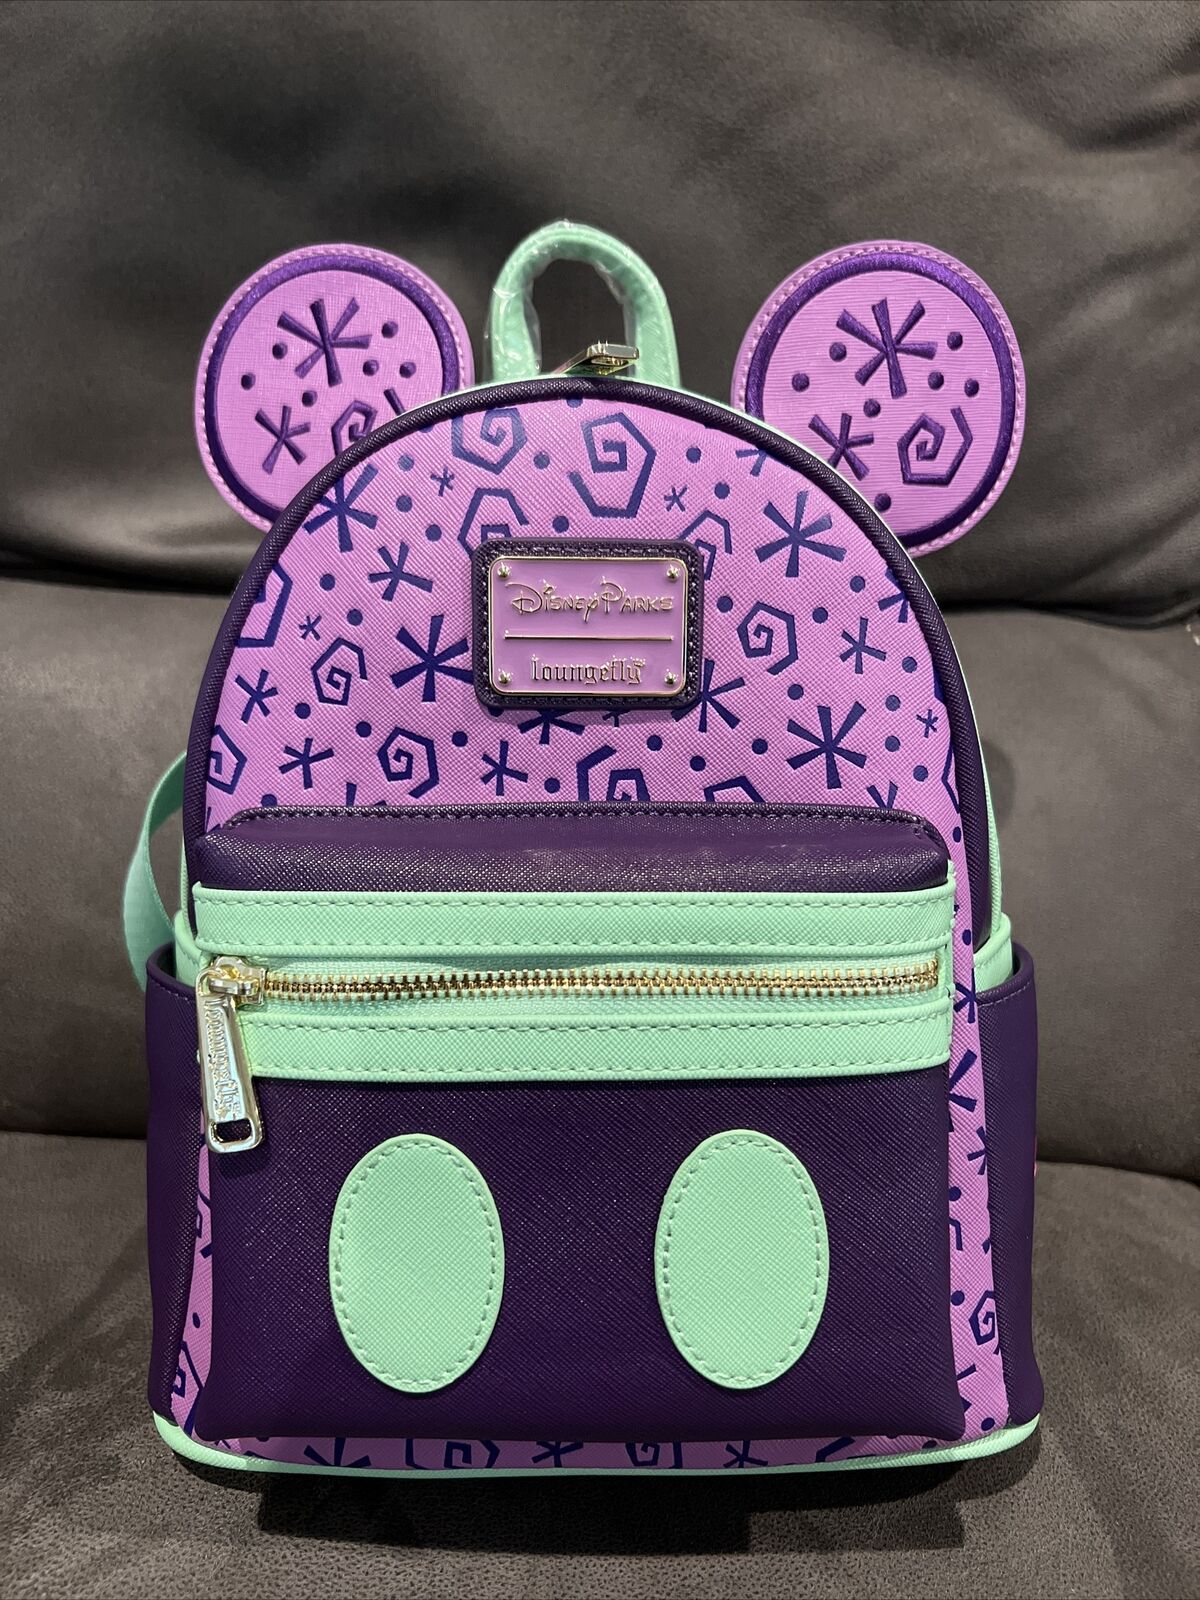 Mickey Mouse: The Main Attraction Mini Backpack by Loungefly – Mad Tea Party 